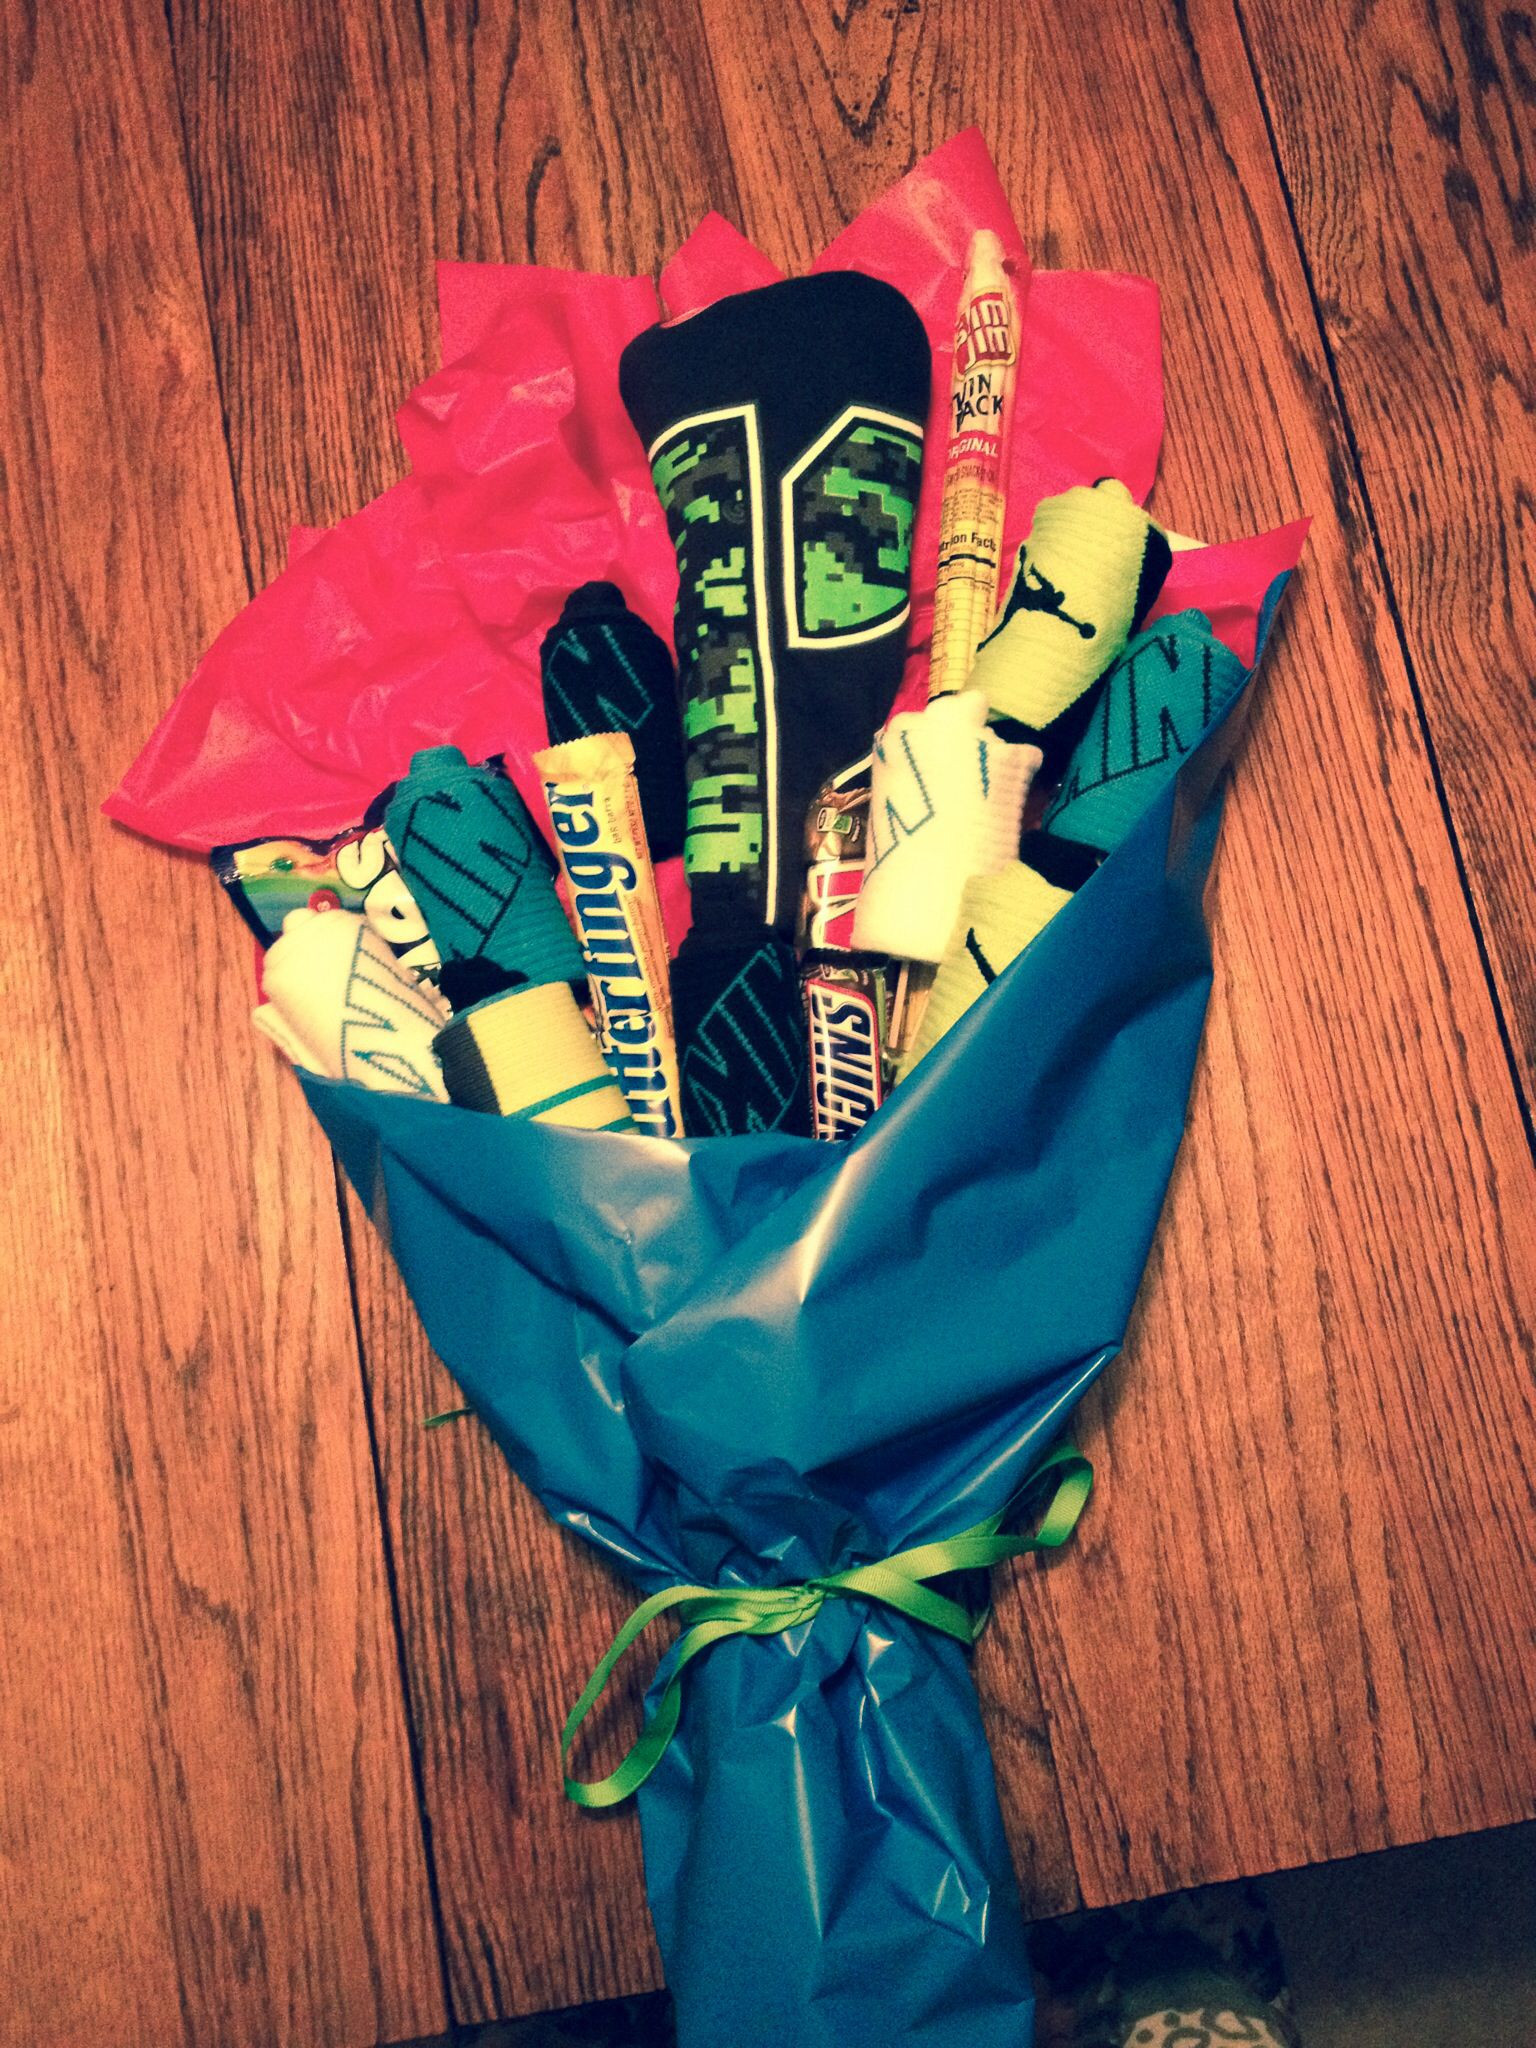 Valentines Day Gift Ideas For Boys
 Nike elite socks bouquet for my 12 year old with treats